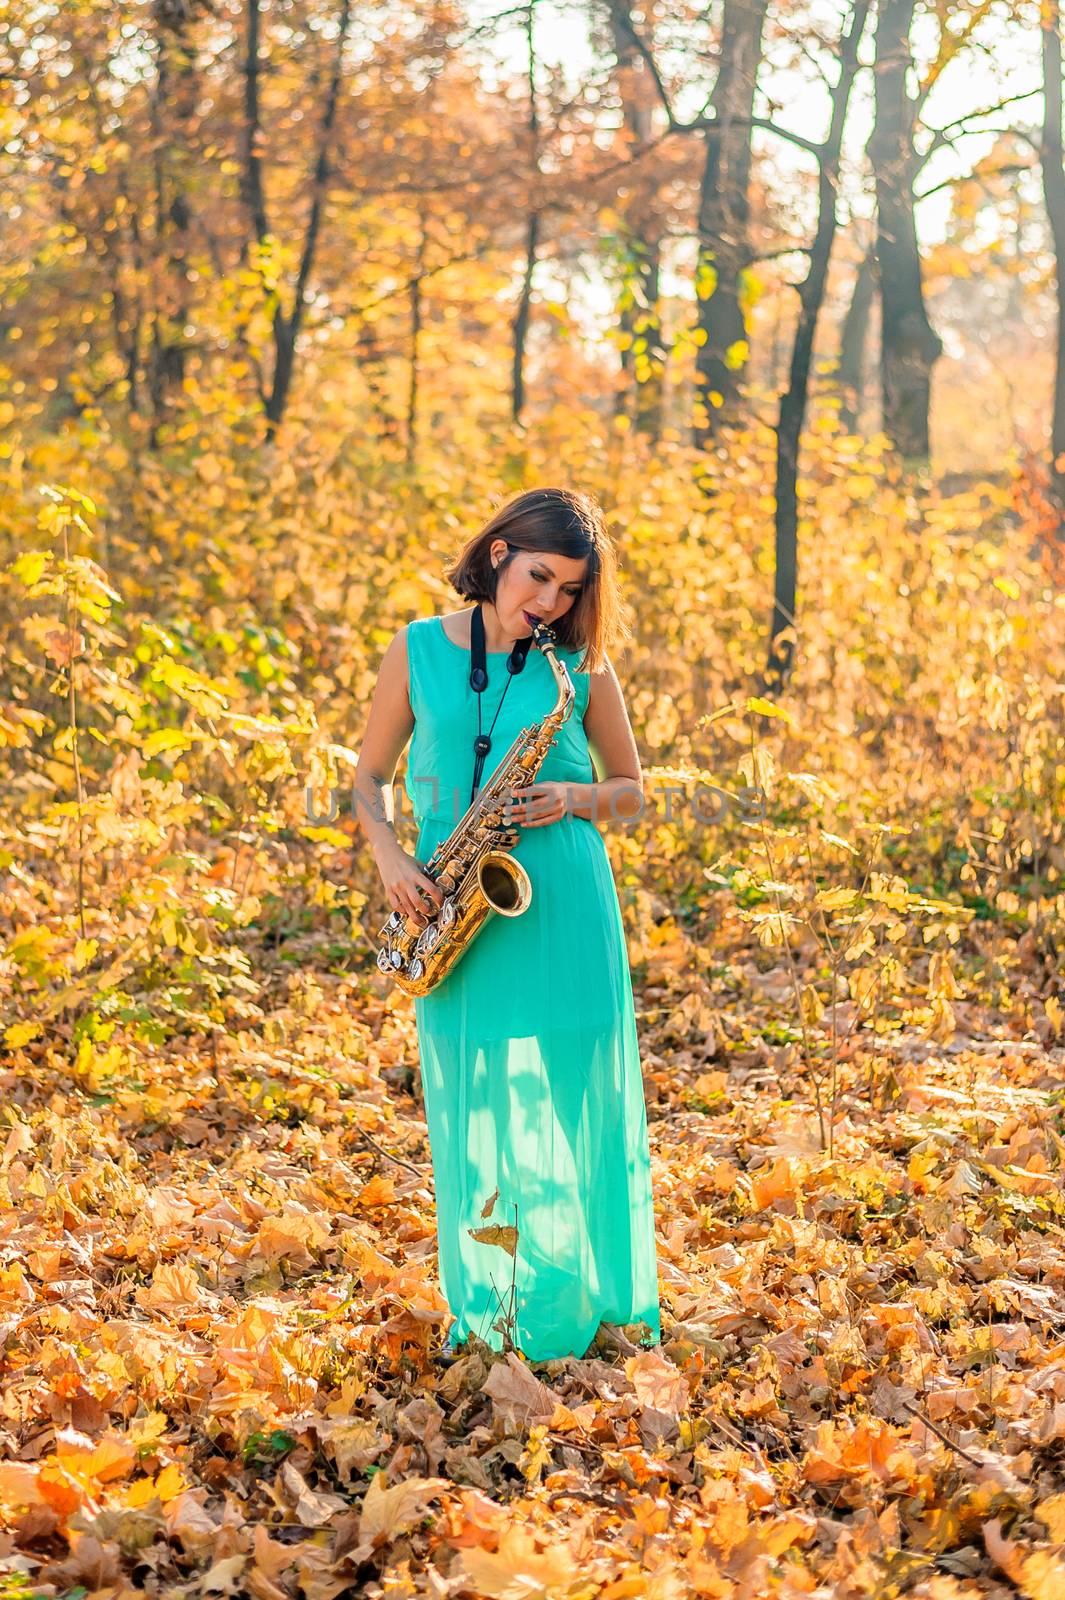 nice girl with black hair in a blue dress plays the alto saxophone in the middle of yellow foliage in a park in autumn